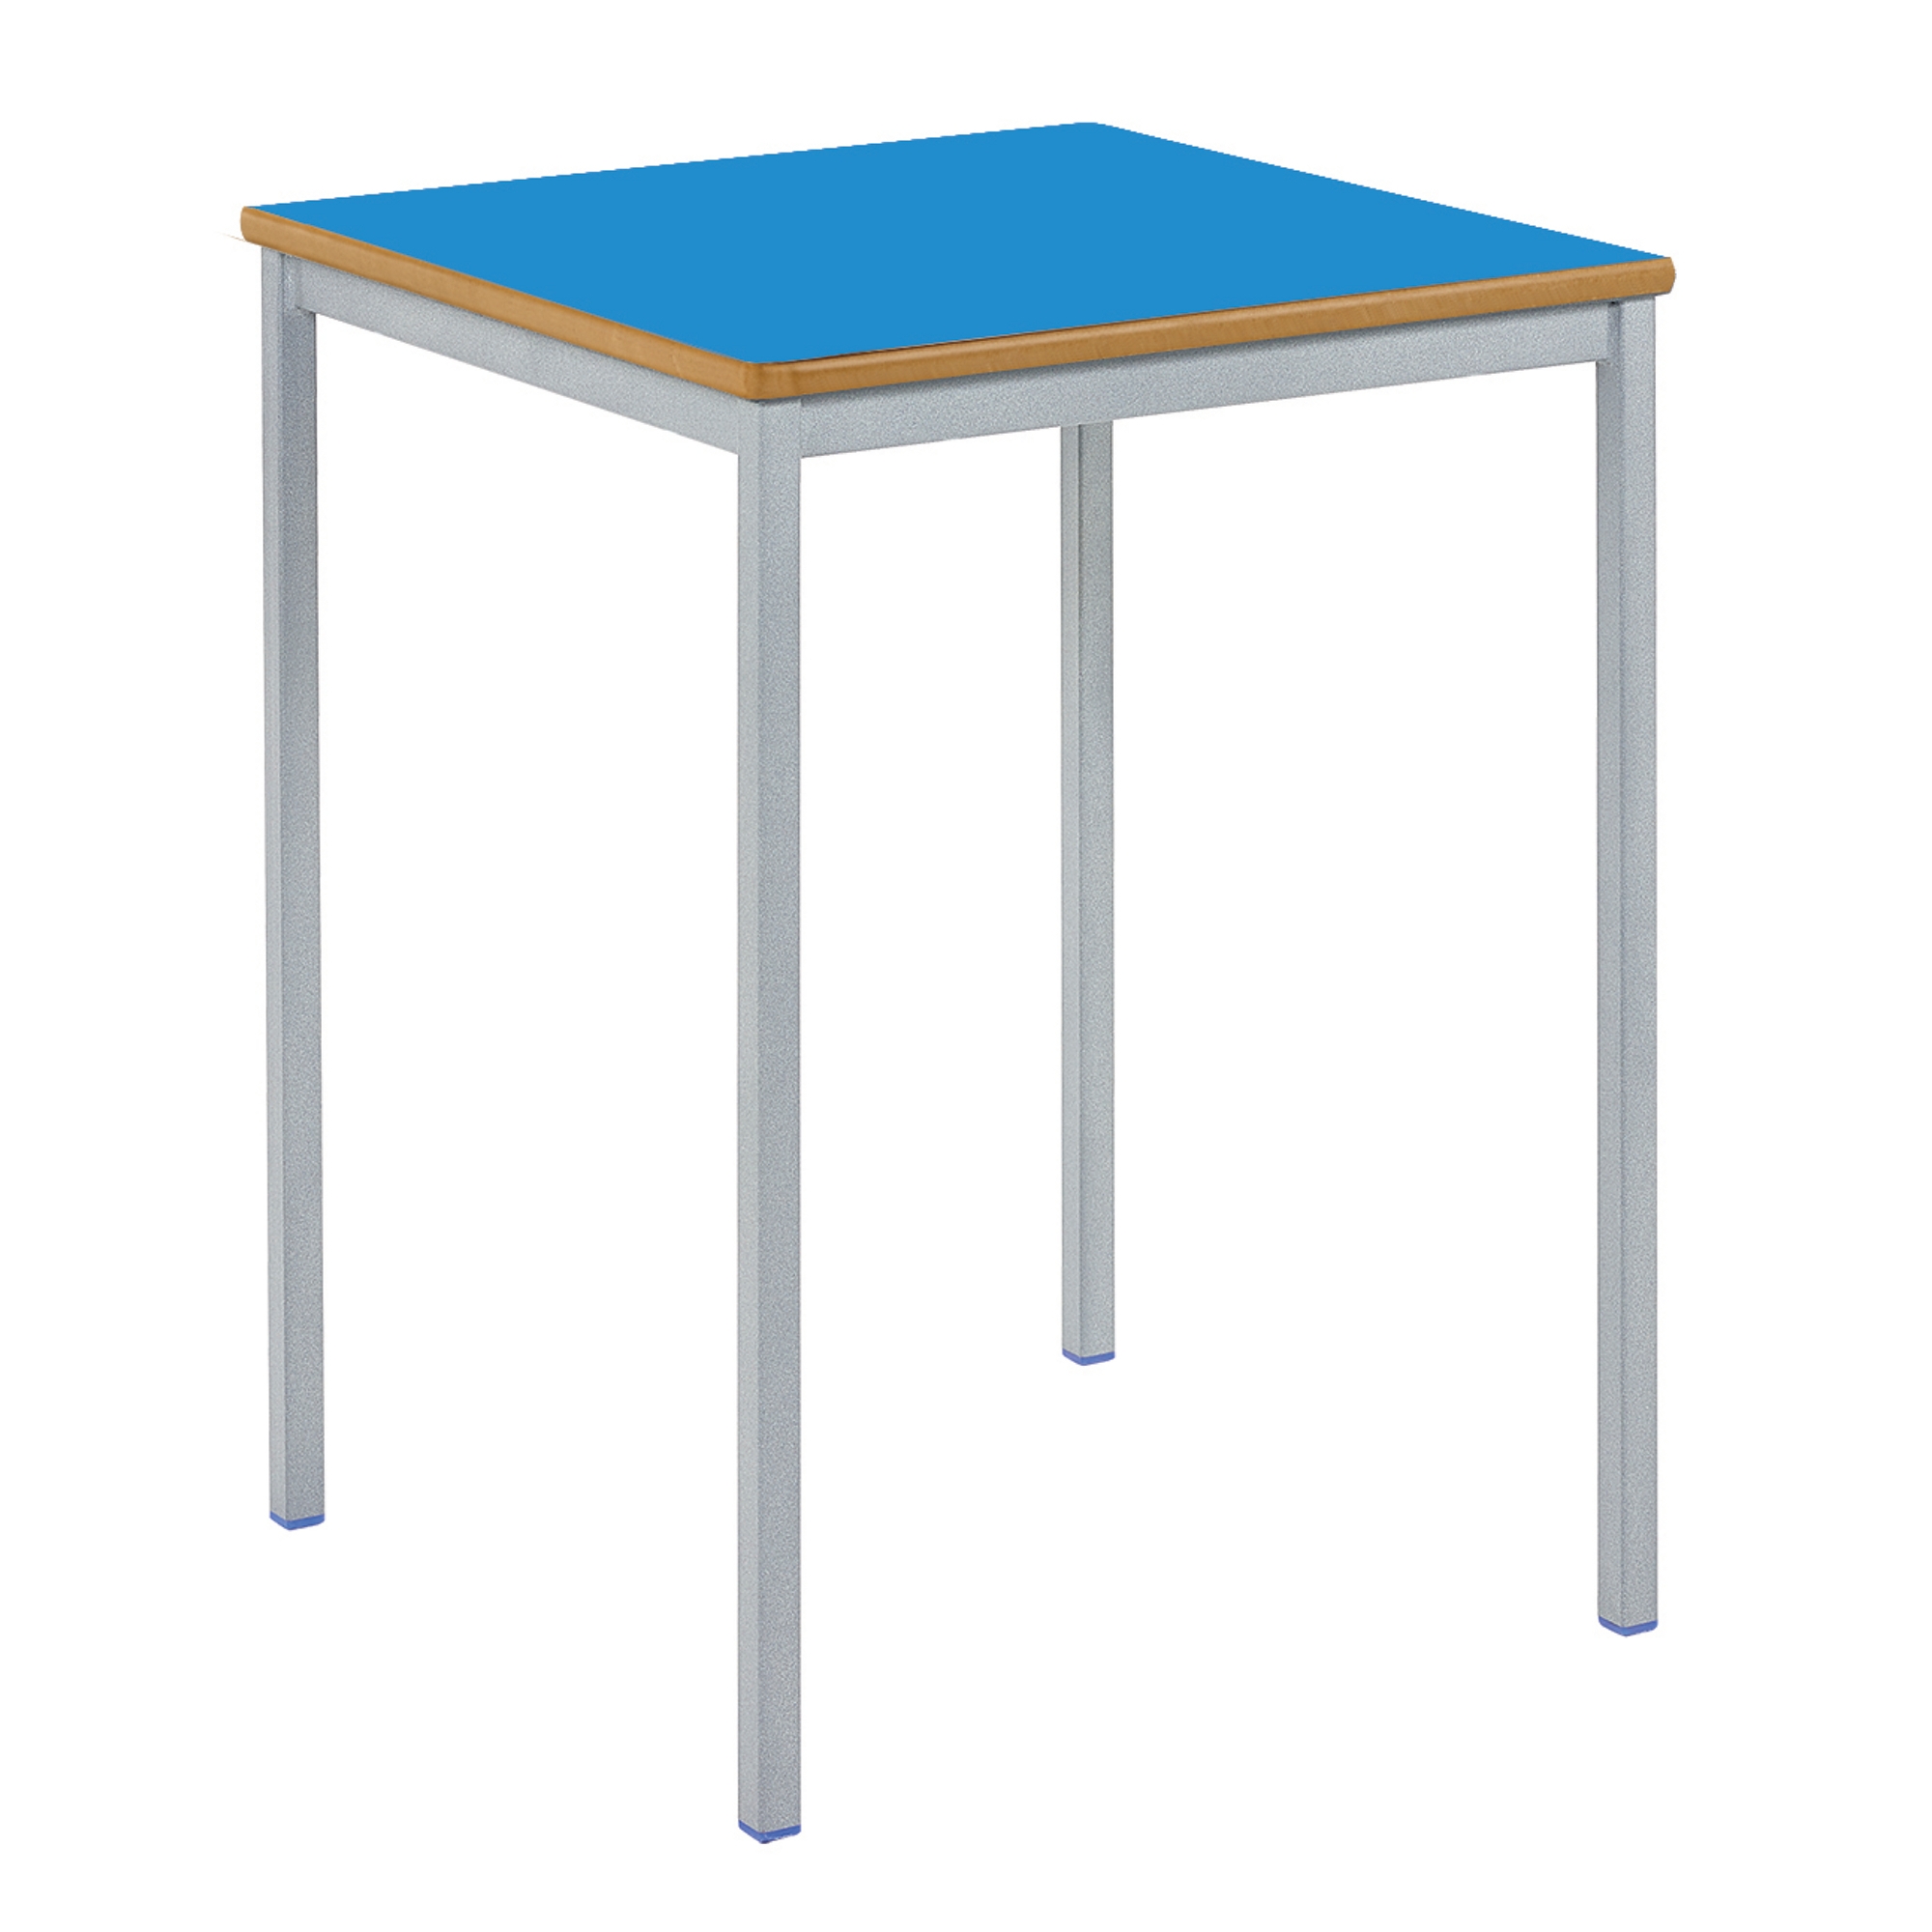 Classmates Square Fully Welded Classroom Table - 600 x 600 x 760mm - Blue